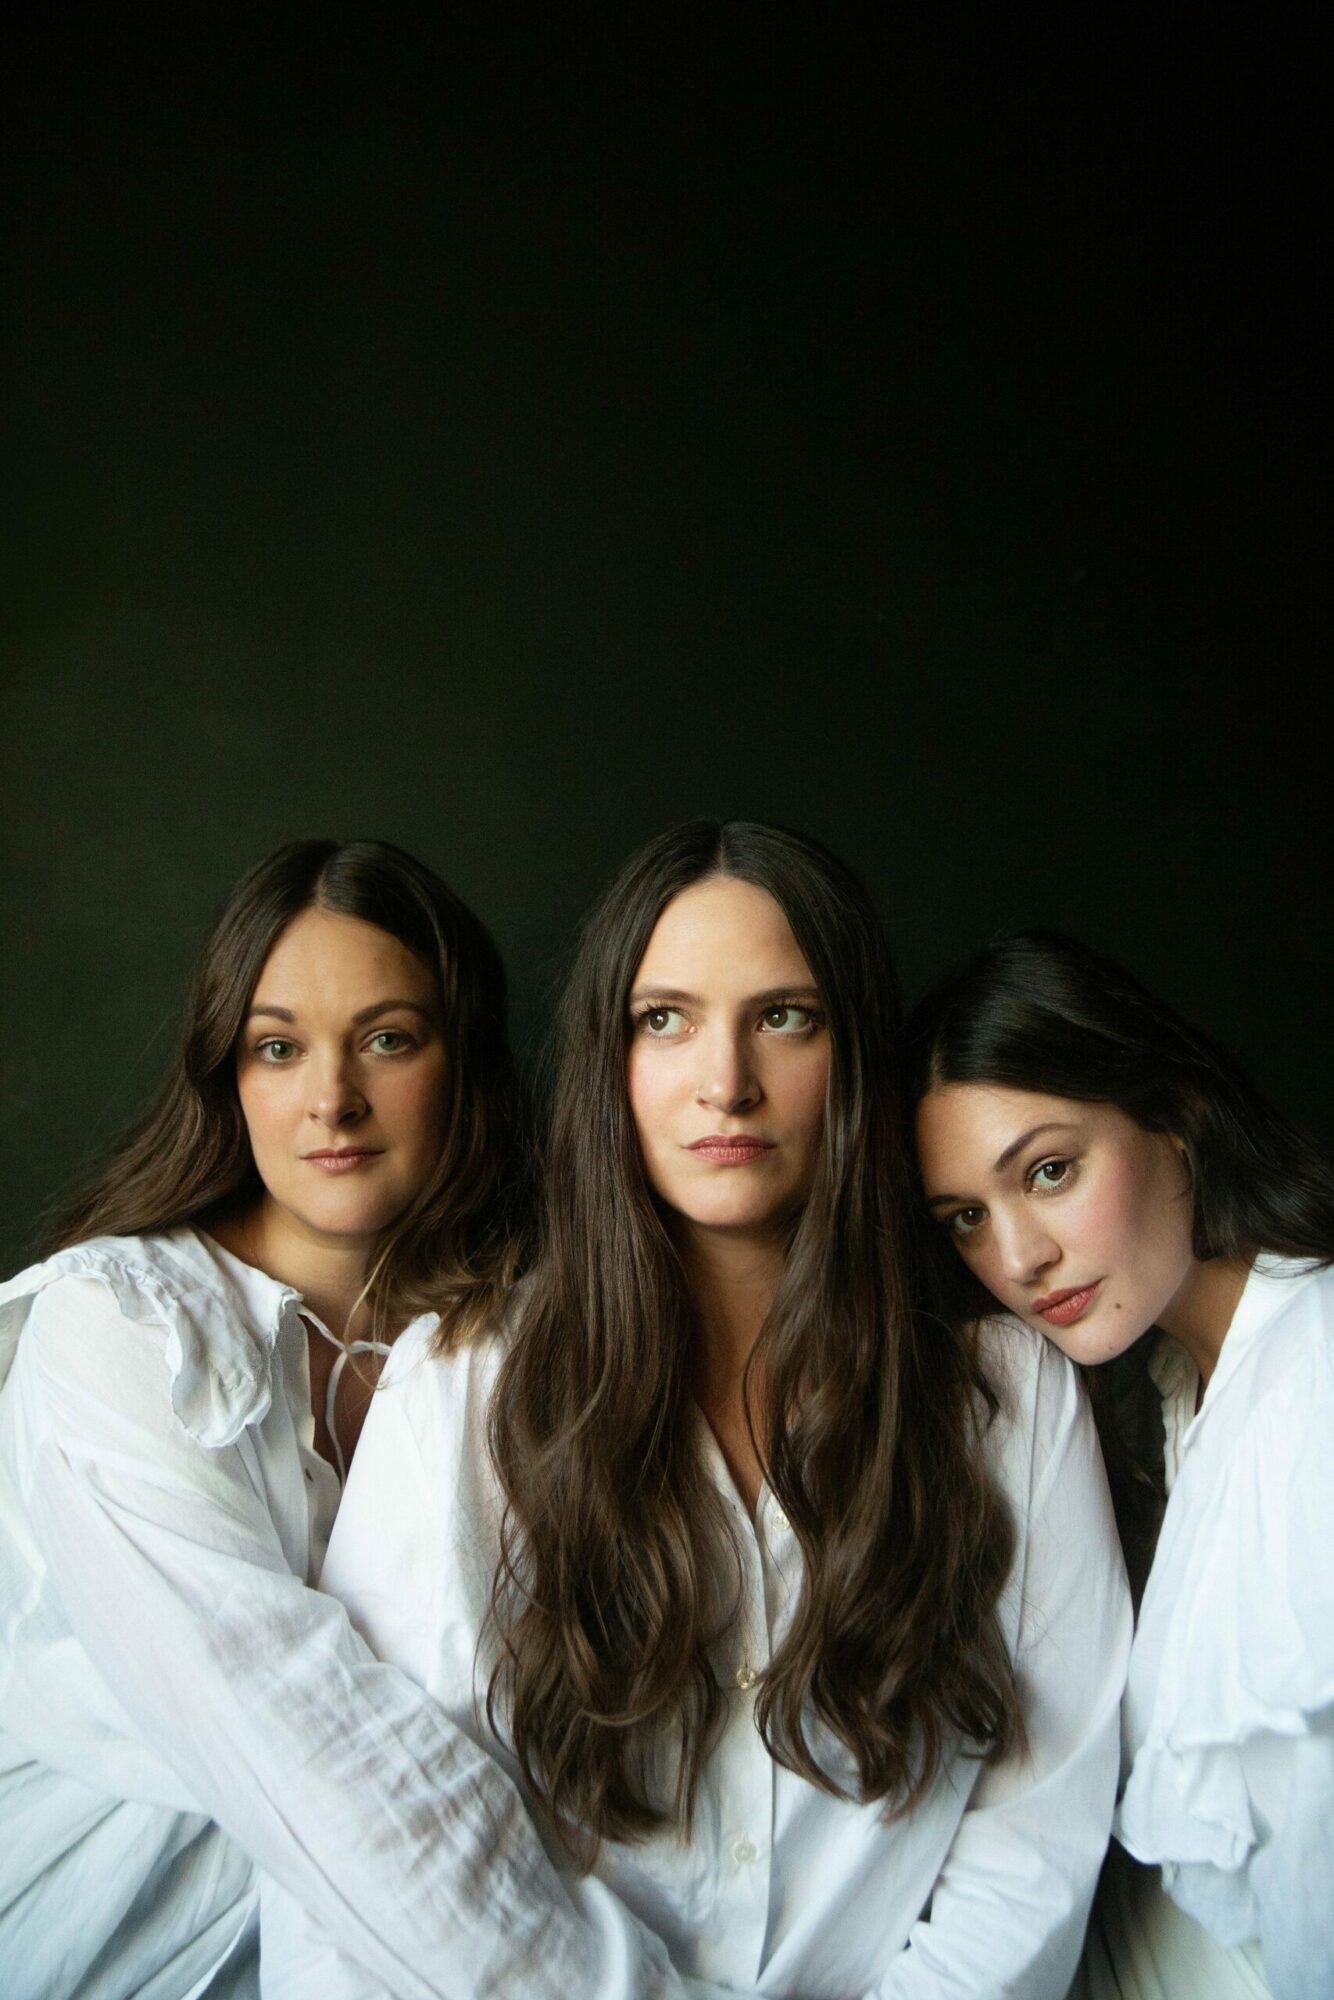 Image name The Staves at Brudenell Social Club Leeds scaled the 1 image from the post The Staves at Brudenell Social Club, Leeds in Yorkshire.com.